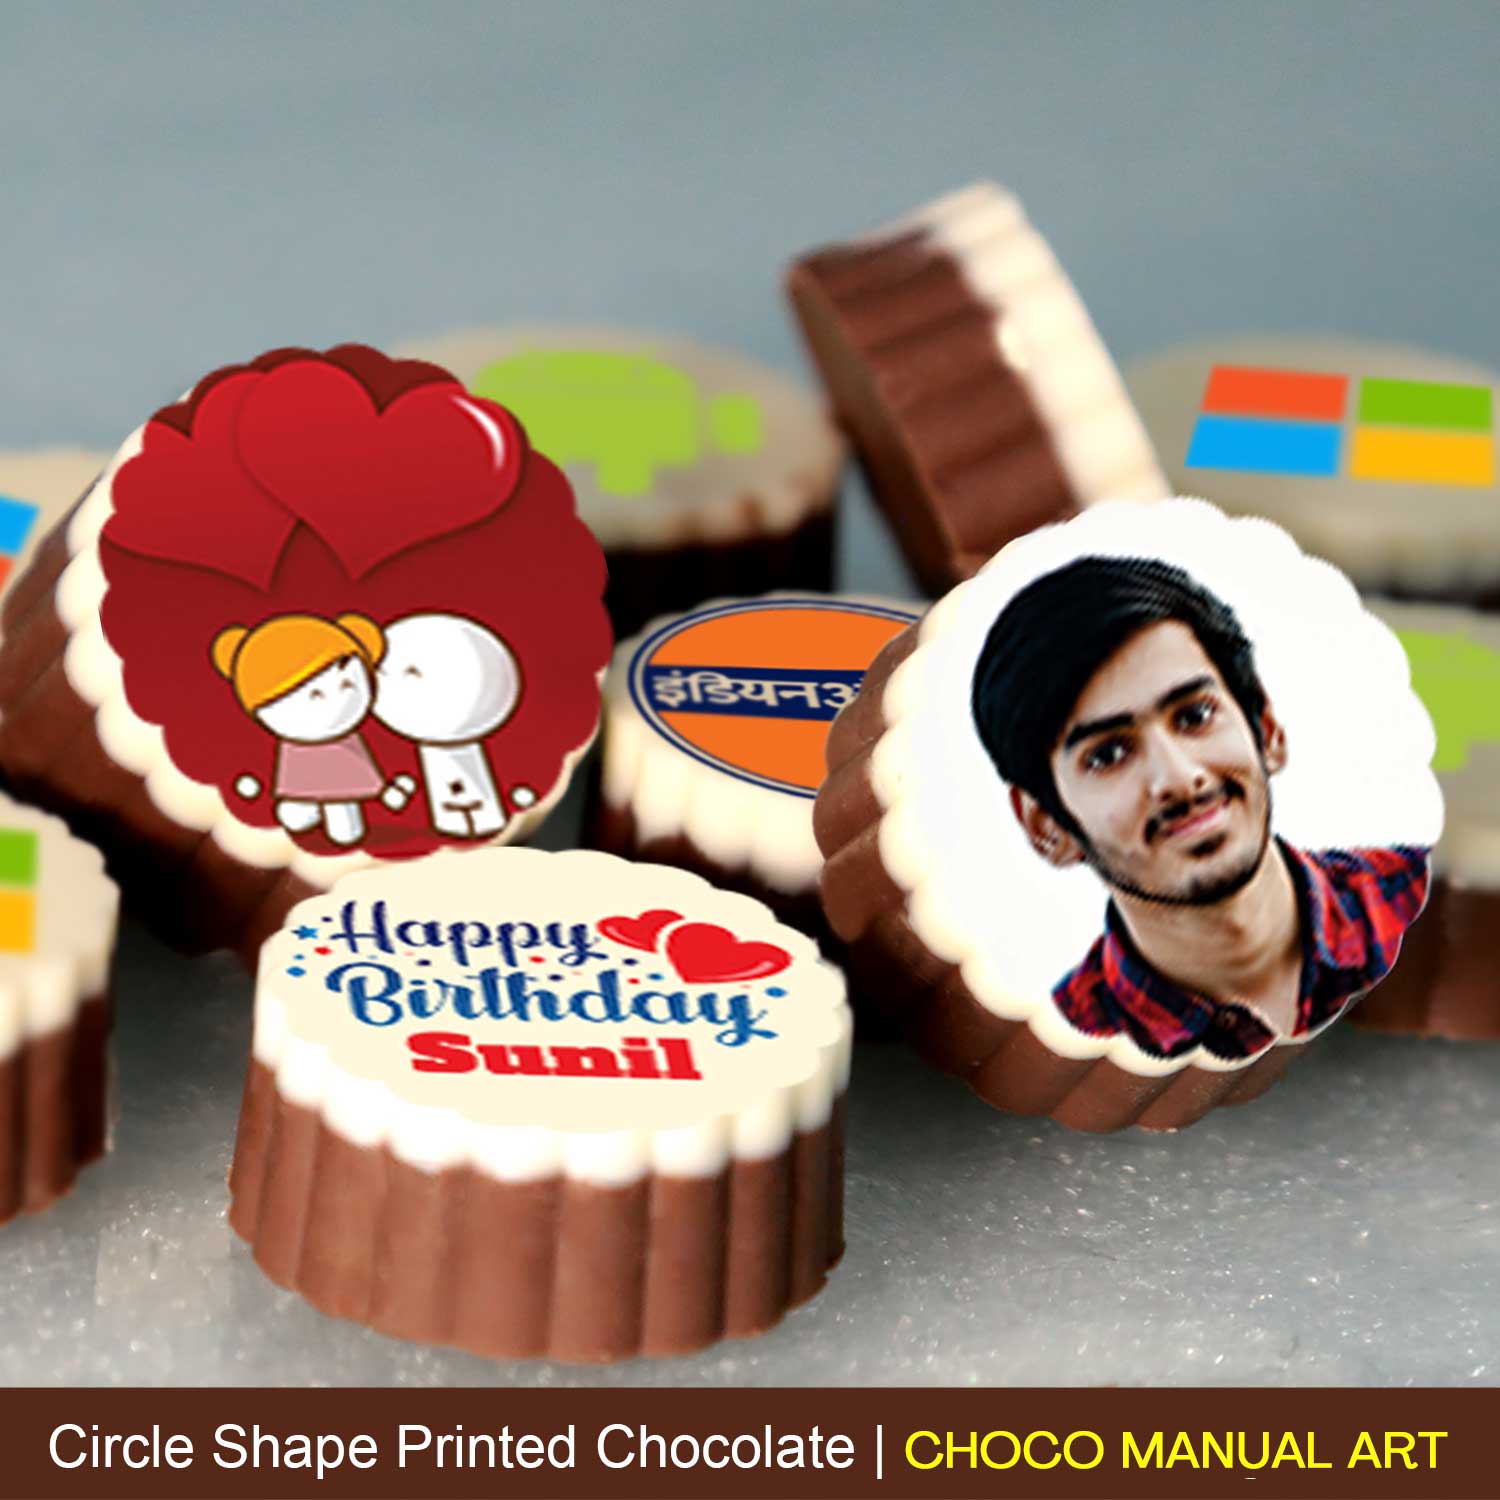 Miss You Printed Personalised Chocolate Gifts - Choco ManualART